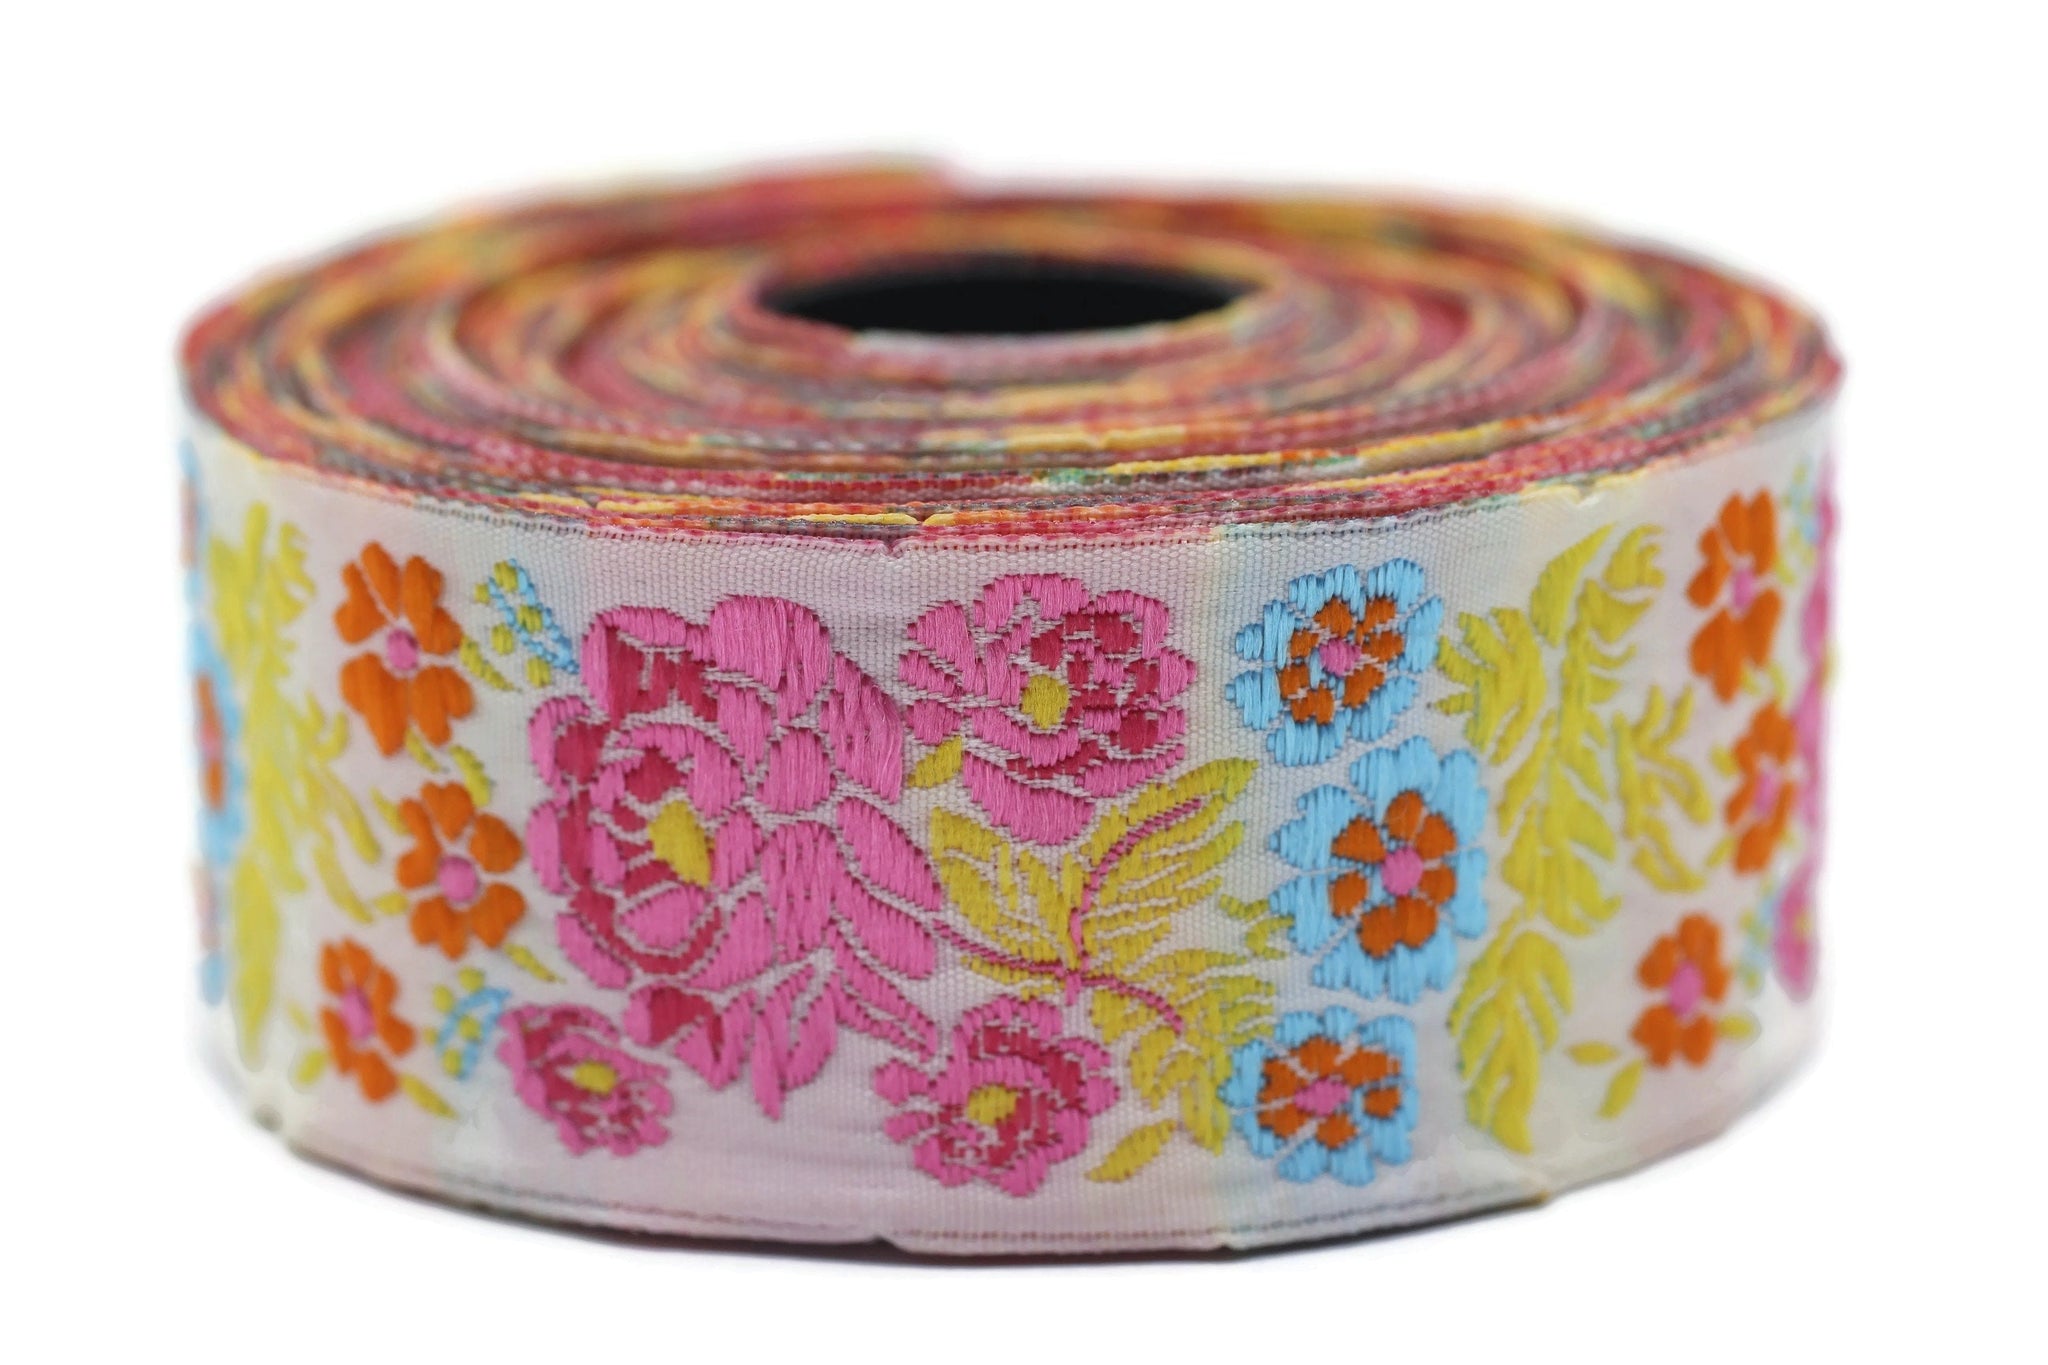 35 mm Colorful Floral Embroidered ribbon (1.37 inches), Vintage Jacquard, Floral ribbon, Sewing trim, Jacquard trim, Jacquard ribbon, 35097